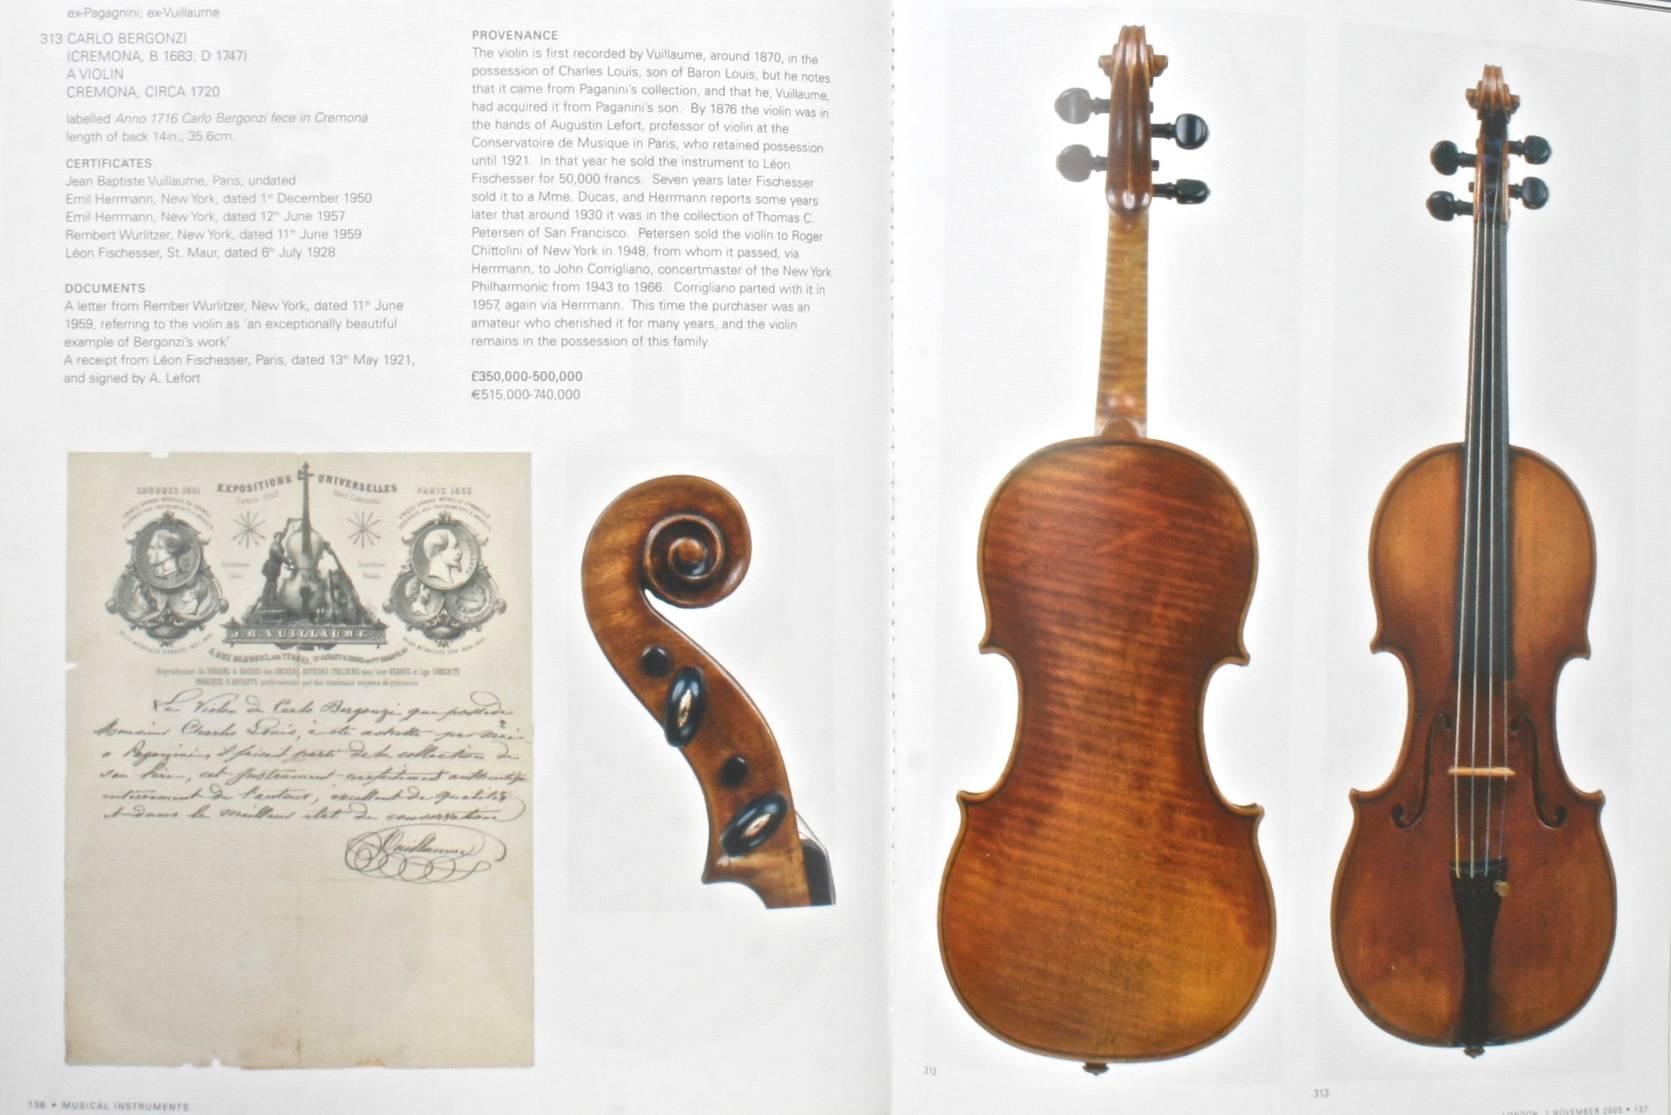 Two Sotheby's London Auction Catalogues on Musical Instruments For Sale 1